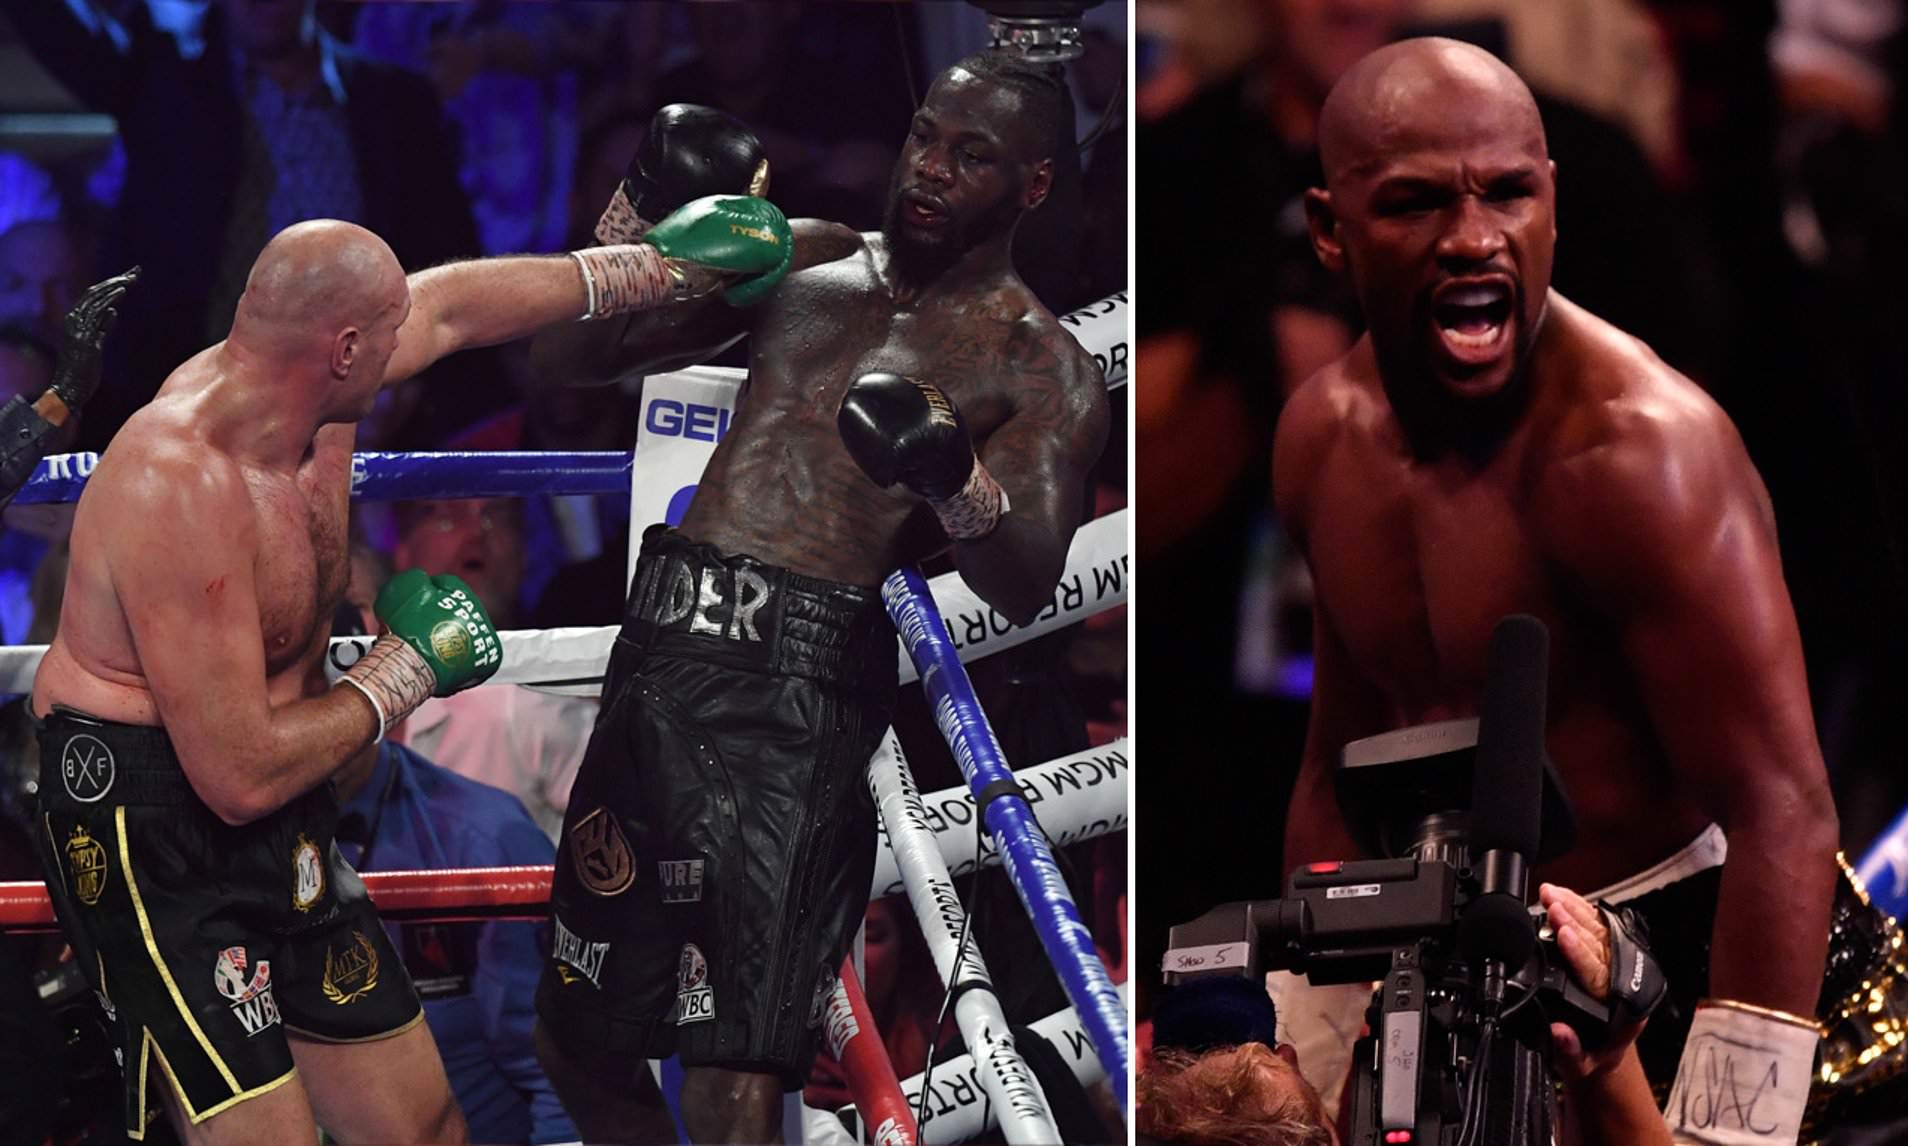 Floyd Mayweather offers to train Deontay Wilder for trilogy fight against Fury